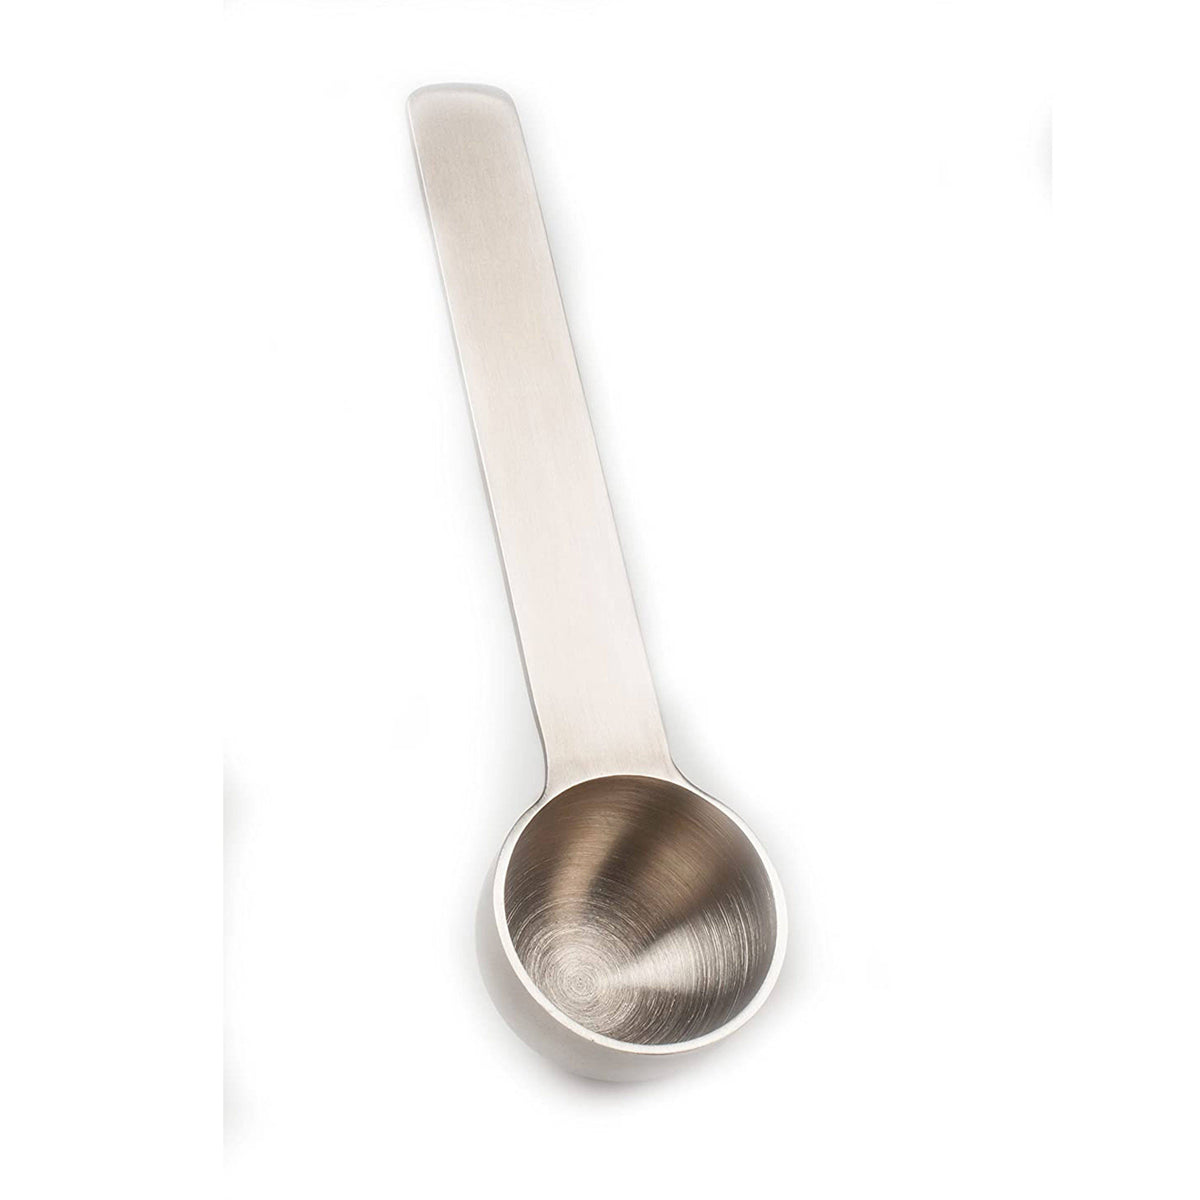 Timoo Coffee Measuring Scoop 1 Tablespoon long handle Stainless